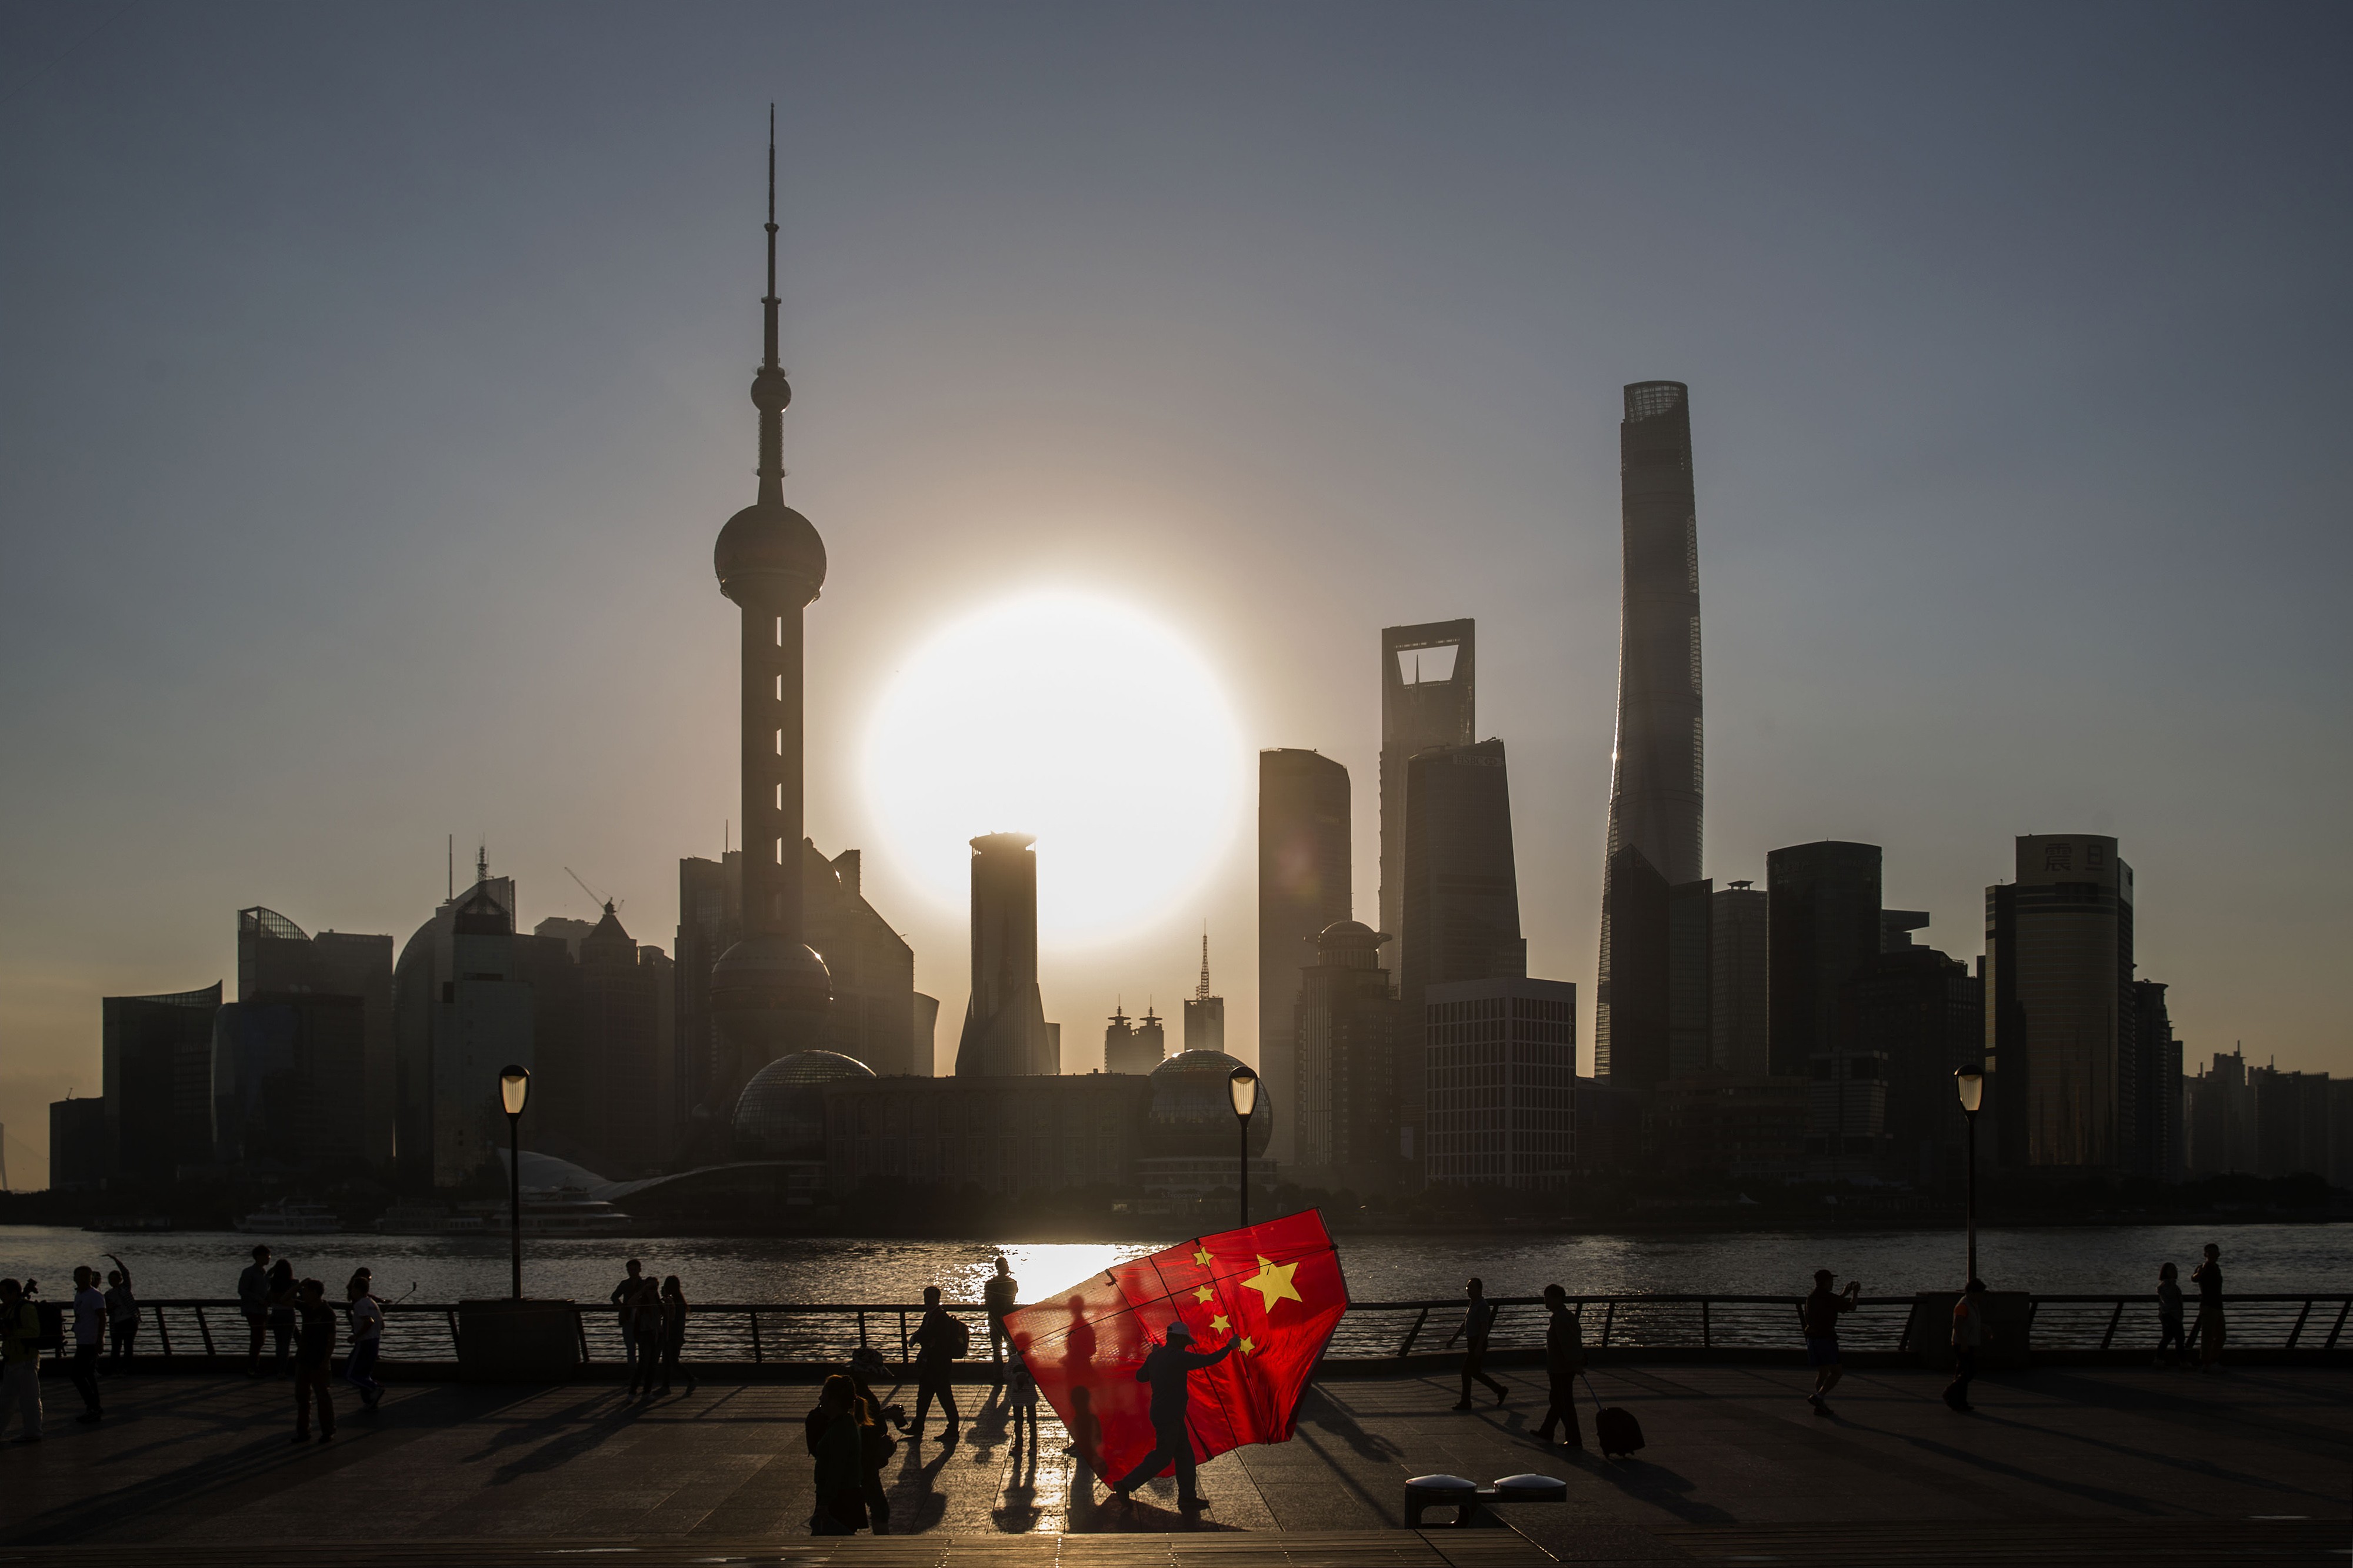 A man carrying a kite in the form of the Chinese national flag walks along the Bund, as the sun rises over the buildings of Pudong's Lujiazui financial district, across the Huangpu River, in Shanghai. Photo: Bloomberg